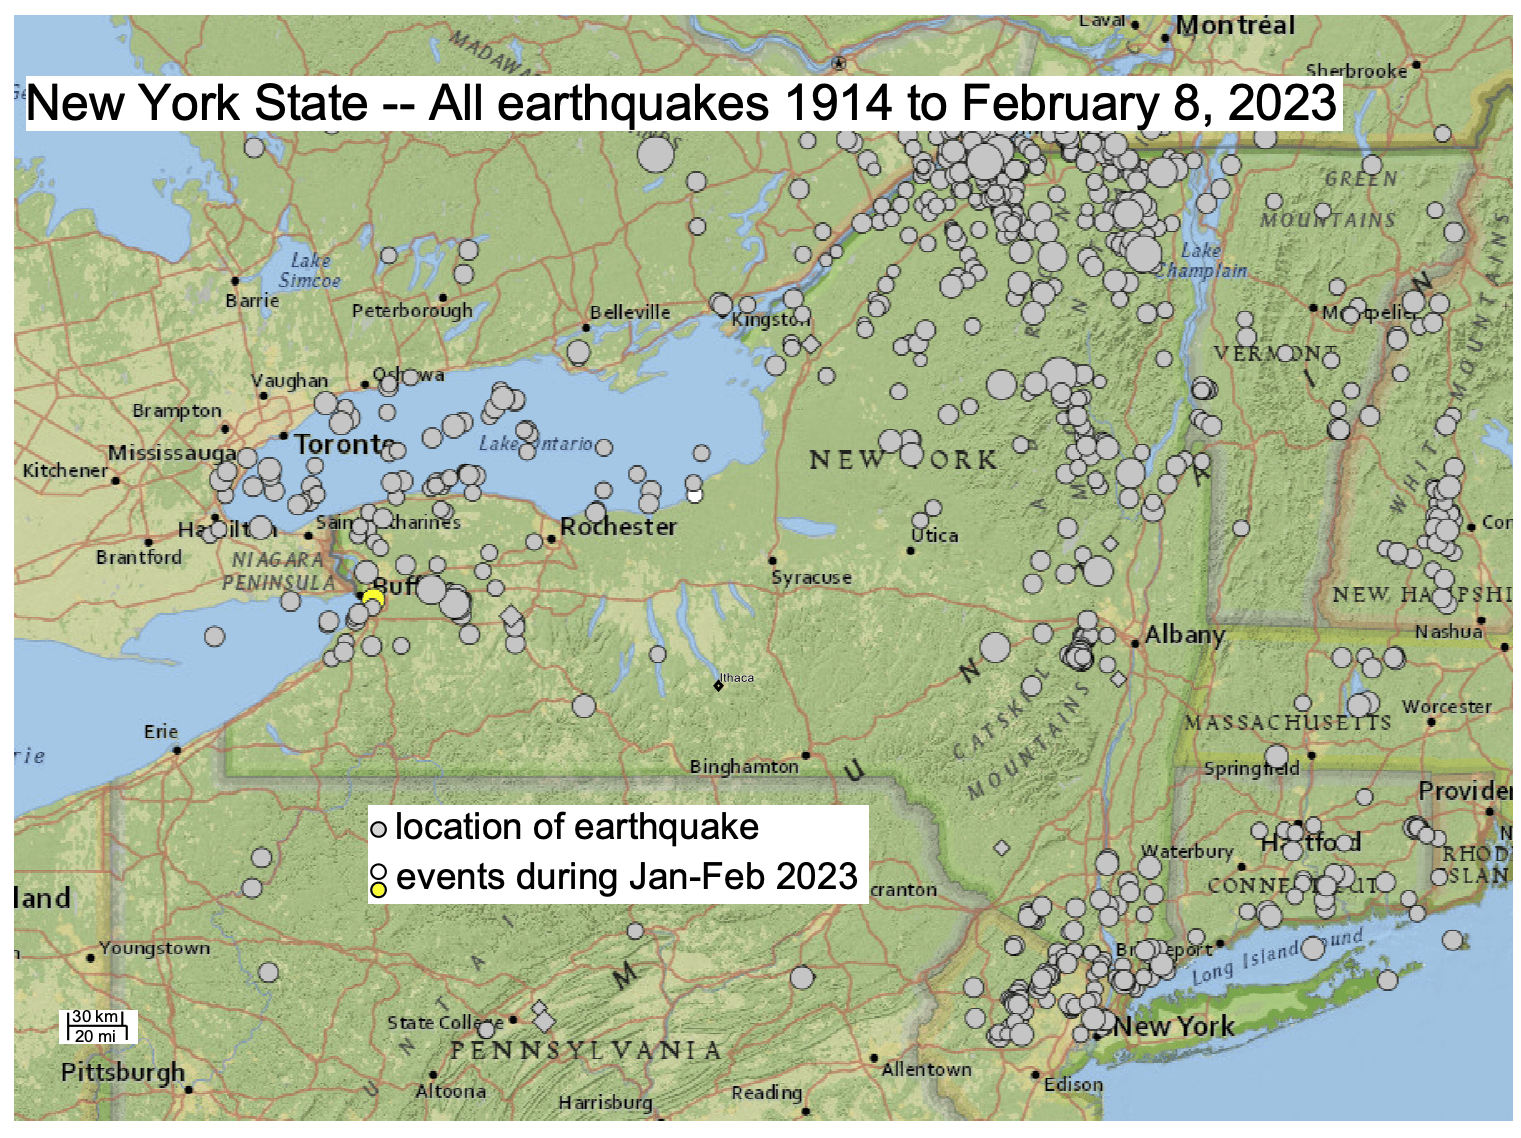 Map of locations of earthquakes in New York State between 1914 and February 2023, from the U.S. Geological Survey